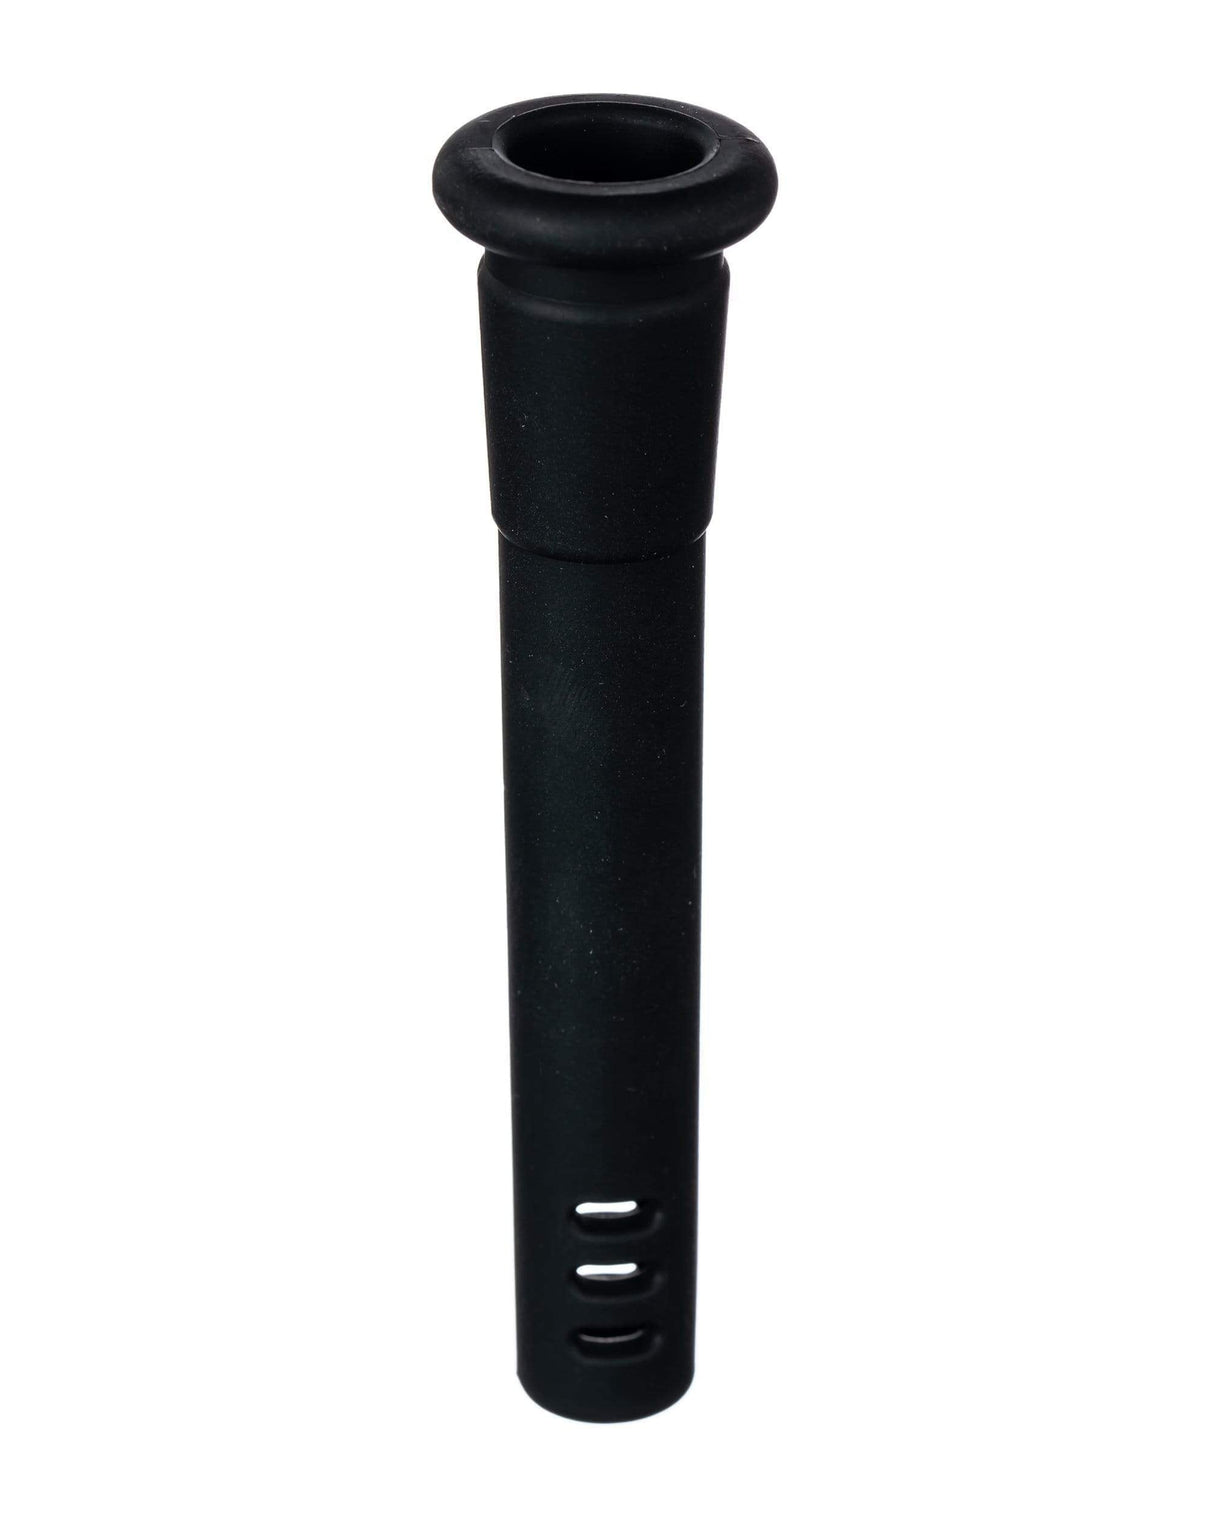 Black Silicone Downstem 3" for Bongs, 18mm to 14mm Female to Male Joint